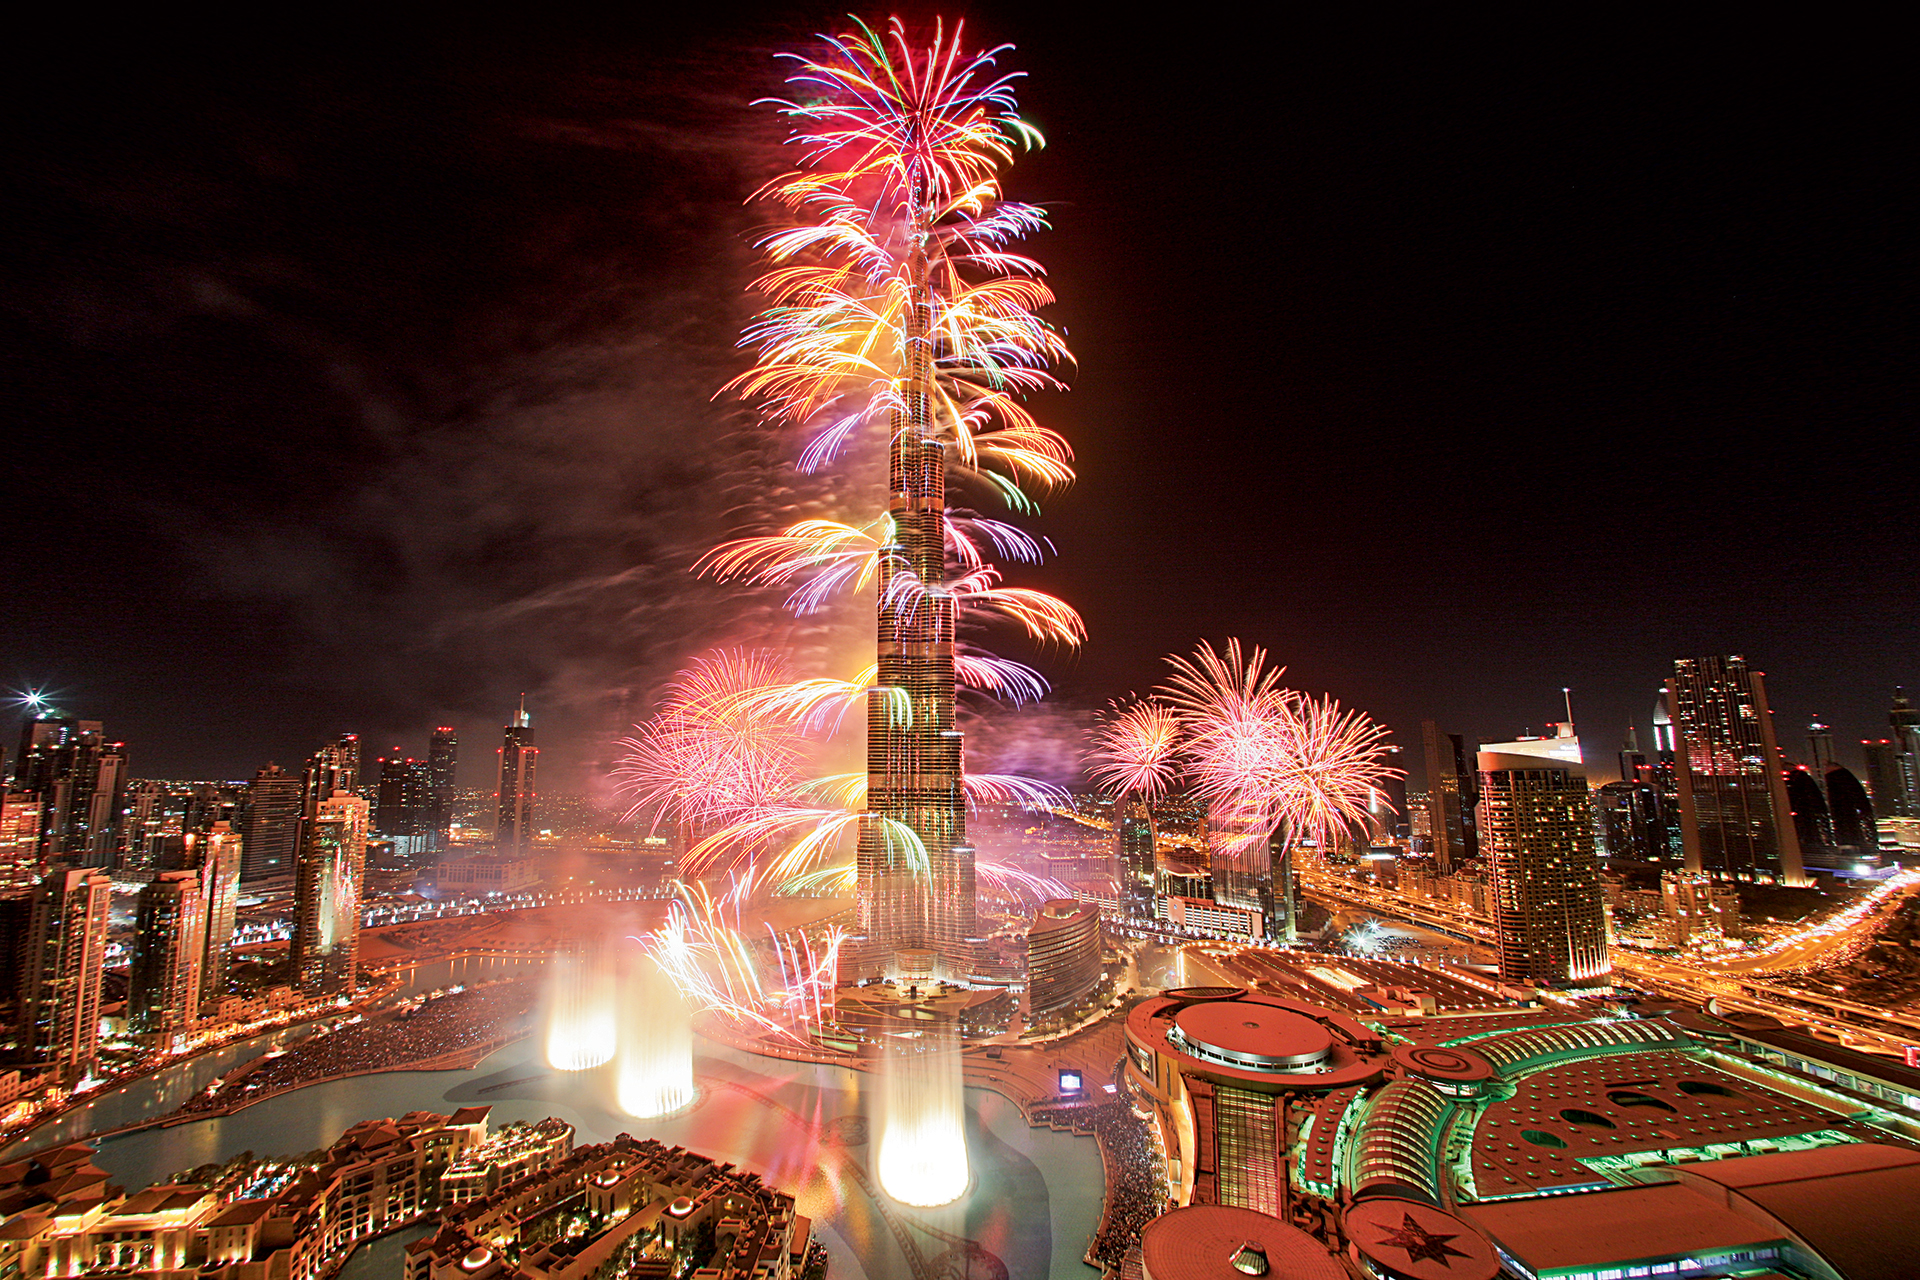 New Year's Eve Dubai Your Ultimate Guide to The Burj Khalifa Fireworks